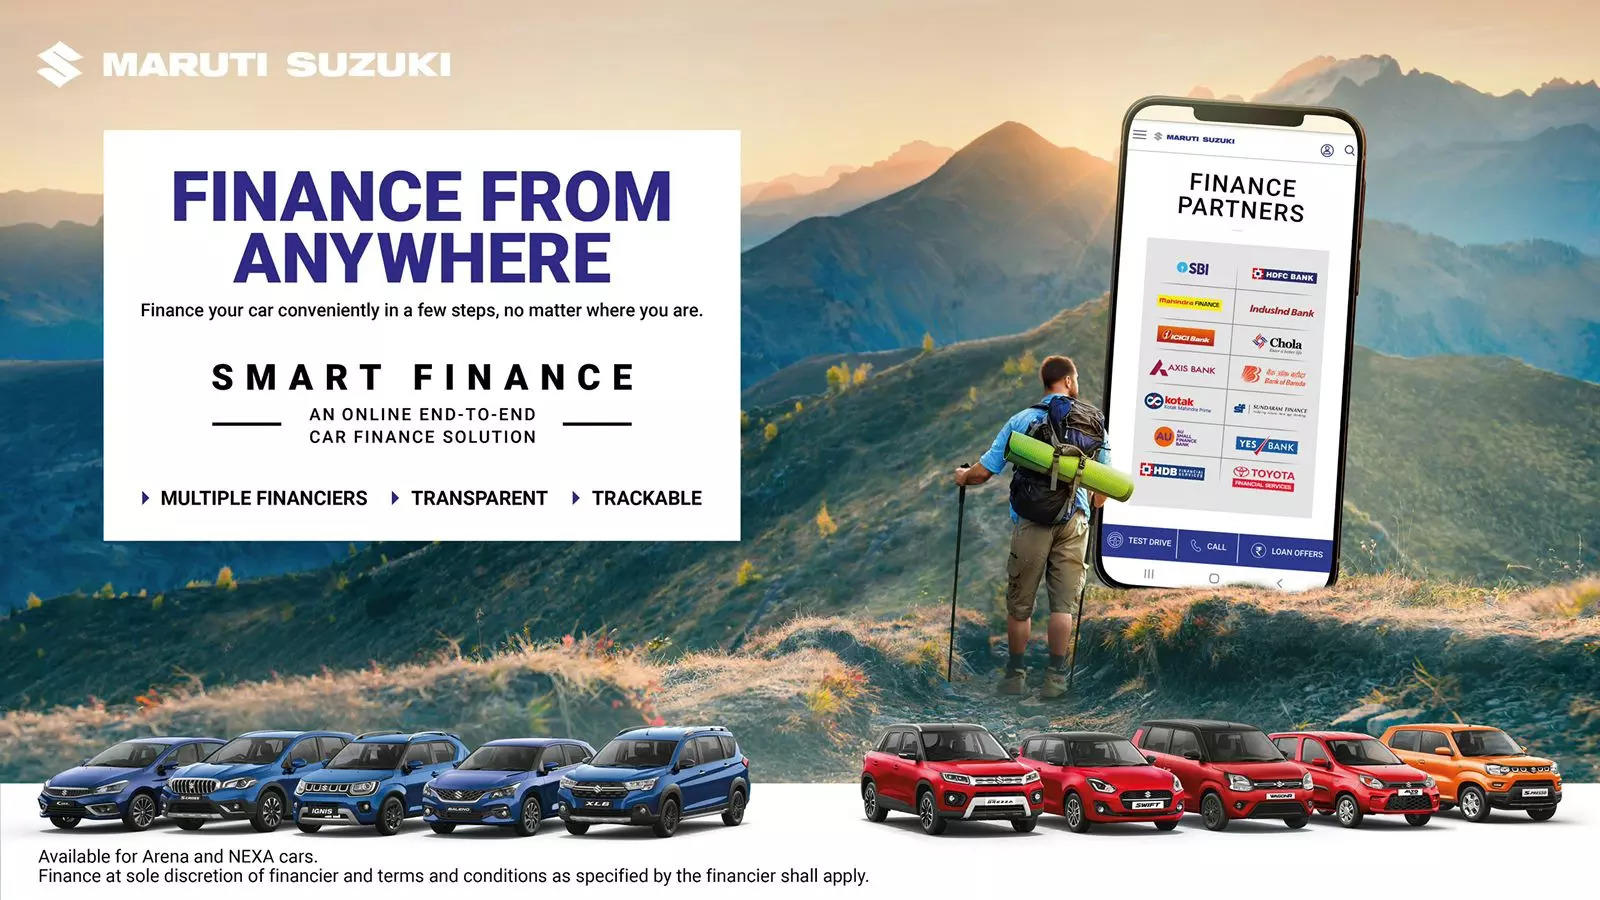 Maruti Suzuki launches “Finance your car from anywhere” campaign